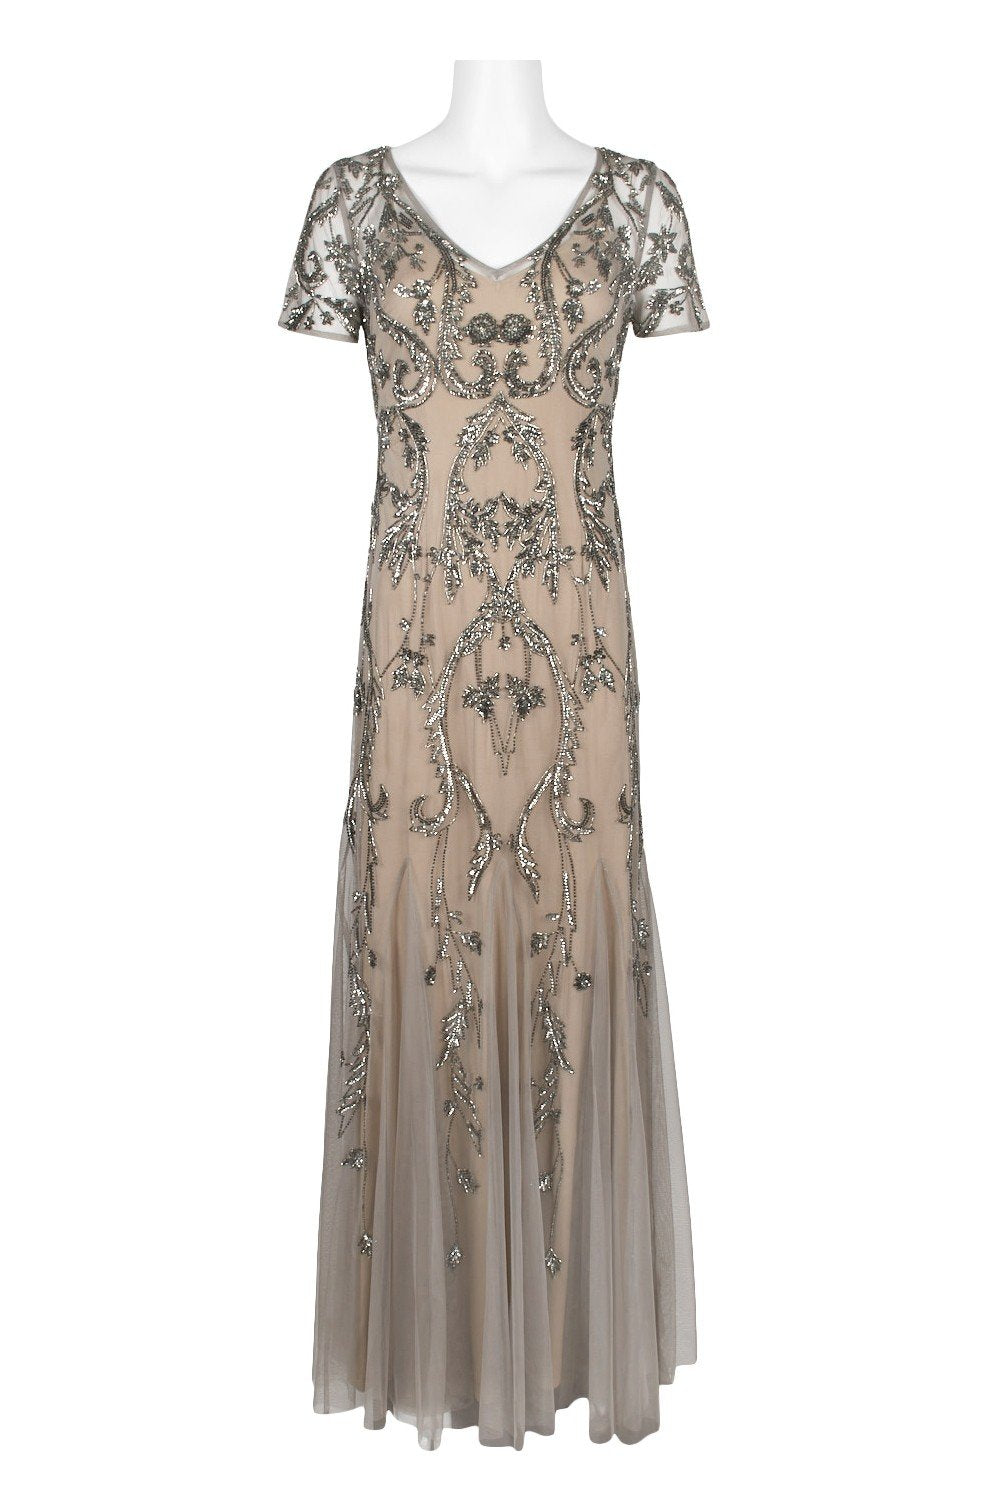 Adrianna Papell - AP1E204586 Embellished V-neck Trumpet Dress In Neutral